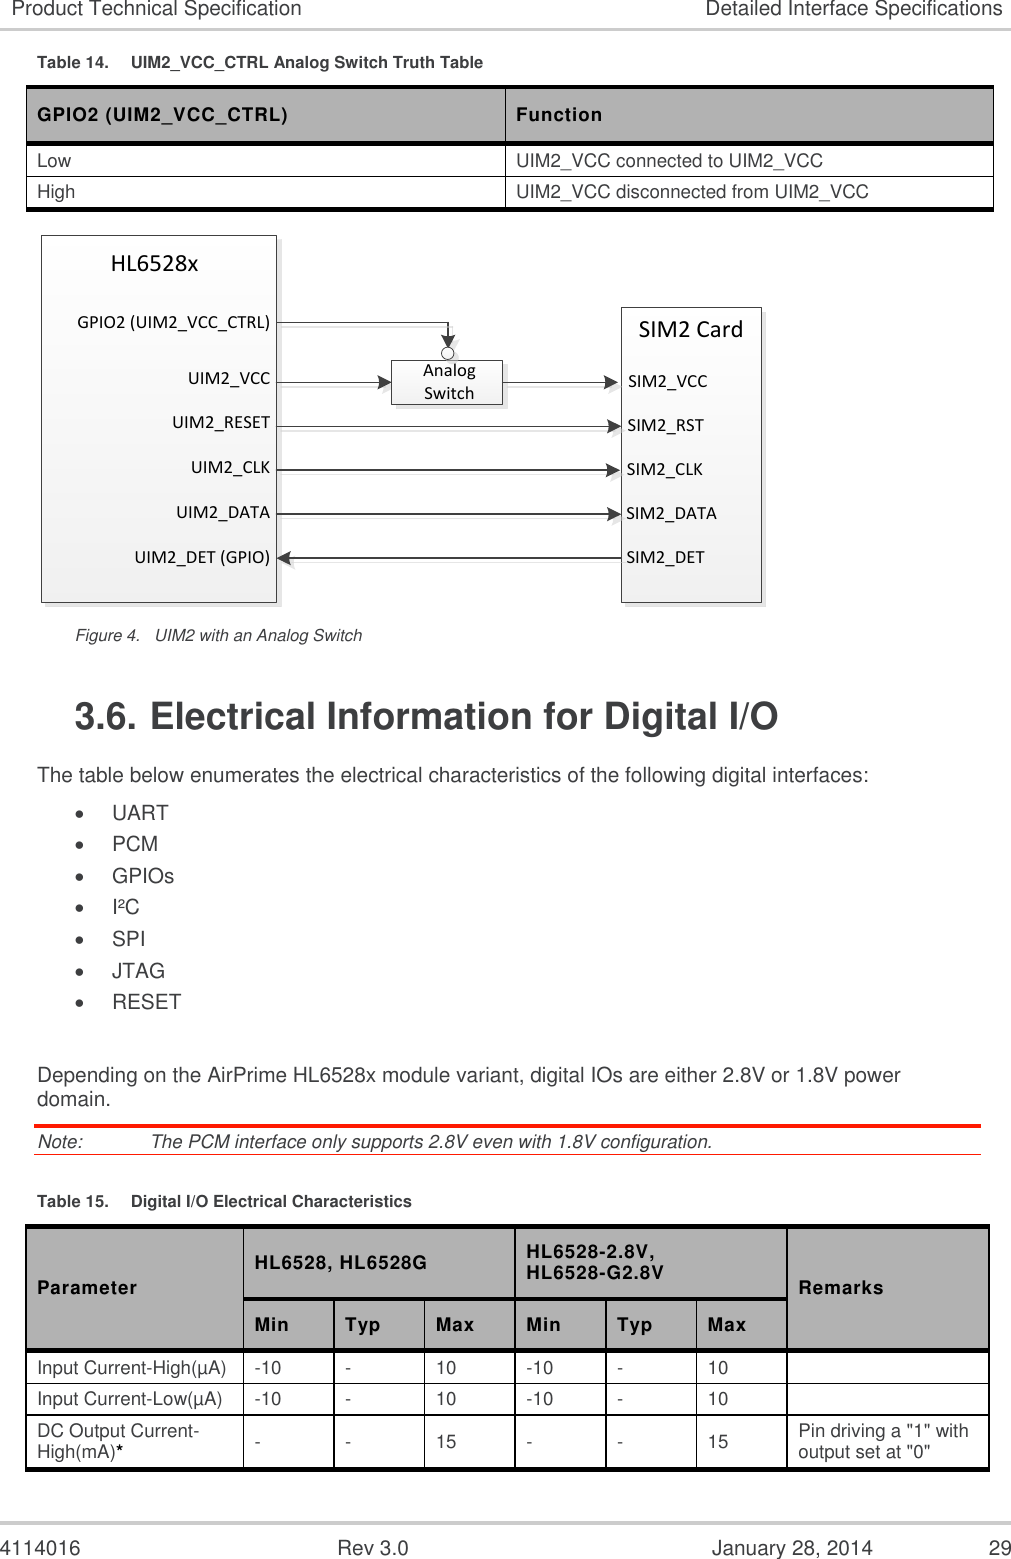  4114016  Rev 3.0  January 28, 2014  29 Product Technical Specification Detailed Interface Specifications Table 14.  UIM2_VCC_CTRL Analog Switch Truth Table GPIO2 (UIM2_VCC_CTRL) Function Low UIM2_VCC connected to UIM2_VCC High UIM2_VCC disconnected from UIM2_VCC HL6528xSIM2 CardAnalogSwitch GPIO2 (UIM2_VCC_CTRL)UIM2_VCCUIM2_RESETUIM2_CLKUIM2_DATASIM2_VCCSIM2_RSTSIM2_CLKSIM2_DATAUIM2_DET (GPIO) SIM2_DET Figure 4.  UIM2 with an Analog Switch 3.6. Electrical Information for Digital I/O The table below enumerates the electrical characteristics of the following digital interfaces:  UART  PCM  GPIOs  I²C  SPI  JTAG  RESET  Depending on the AirPrime HL6528x module variant, digital IOs are either 2.8V or 1.8V power domain. Note:   The PCM interface only supports 2.8V even with 1.8V configuration. Table 15.  Digital I/O Electrical Characteristics Parameter HL6528, HL6528G HL6528-2.8V, HL6528-G2.8V Remarks Min Typ Max Min Typ Max Input Current-High(µA) -10 - 10 -10 - 10   Input Current-Low(µA) -10 - 10 -10 - 10   DC Output Current-High(mA)* - - 15 - - 15 Pin driving a &quot;1&quot; with output set at &quot;0&quot; 